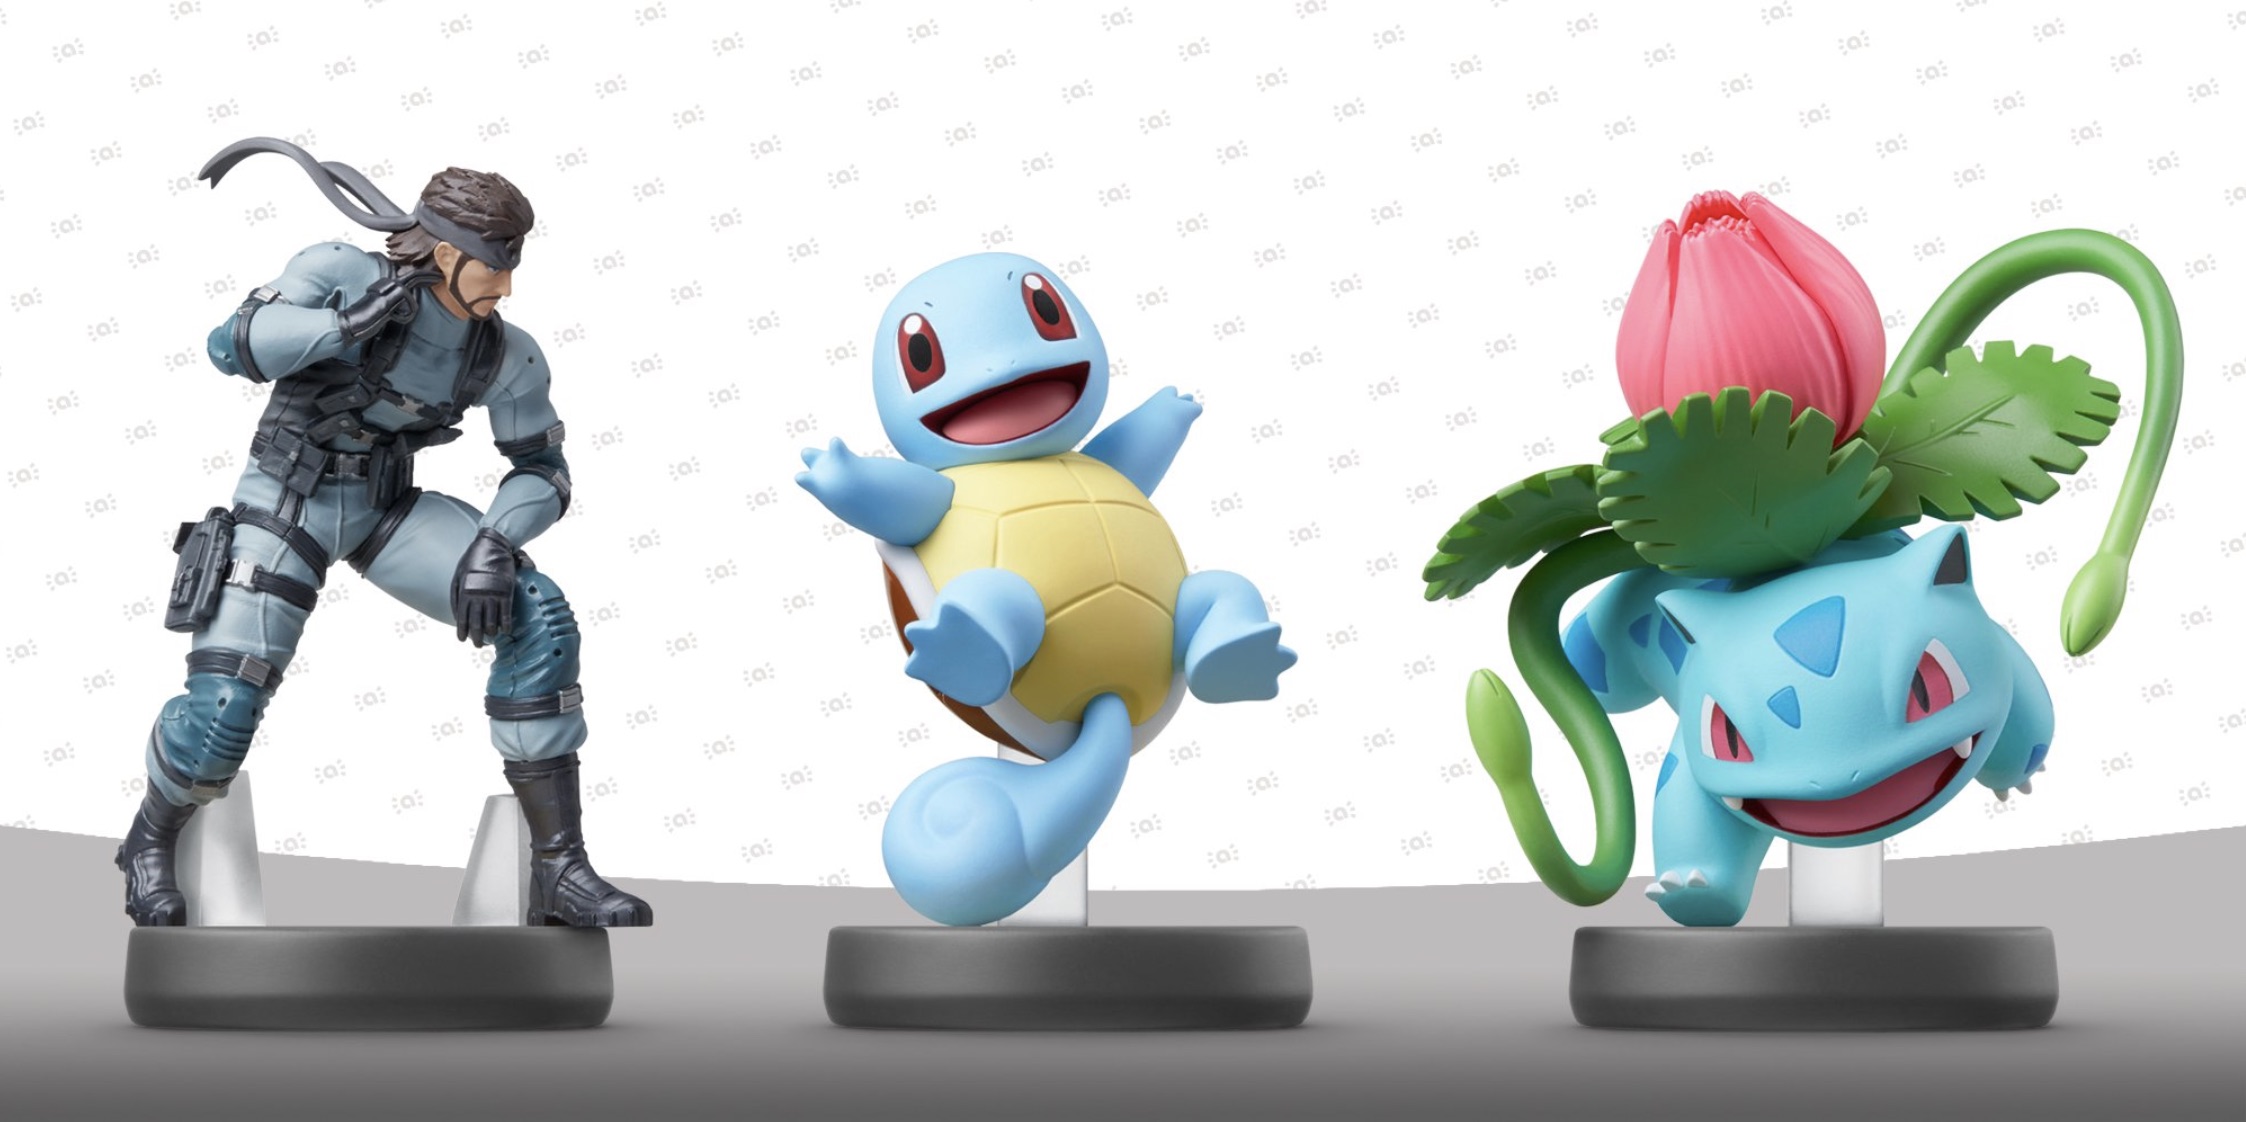 Snake, Ivysaur and Squirtle amiibo Photo